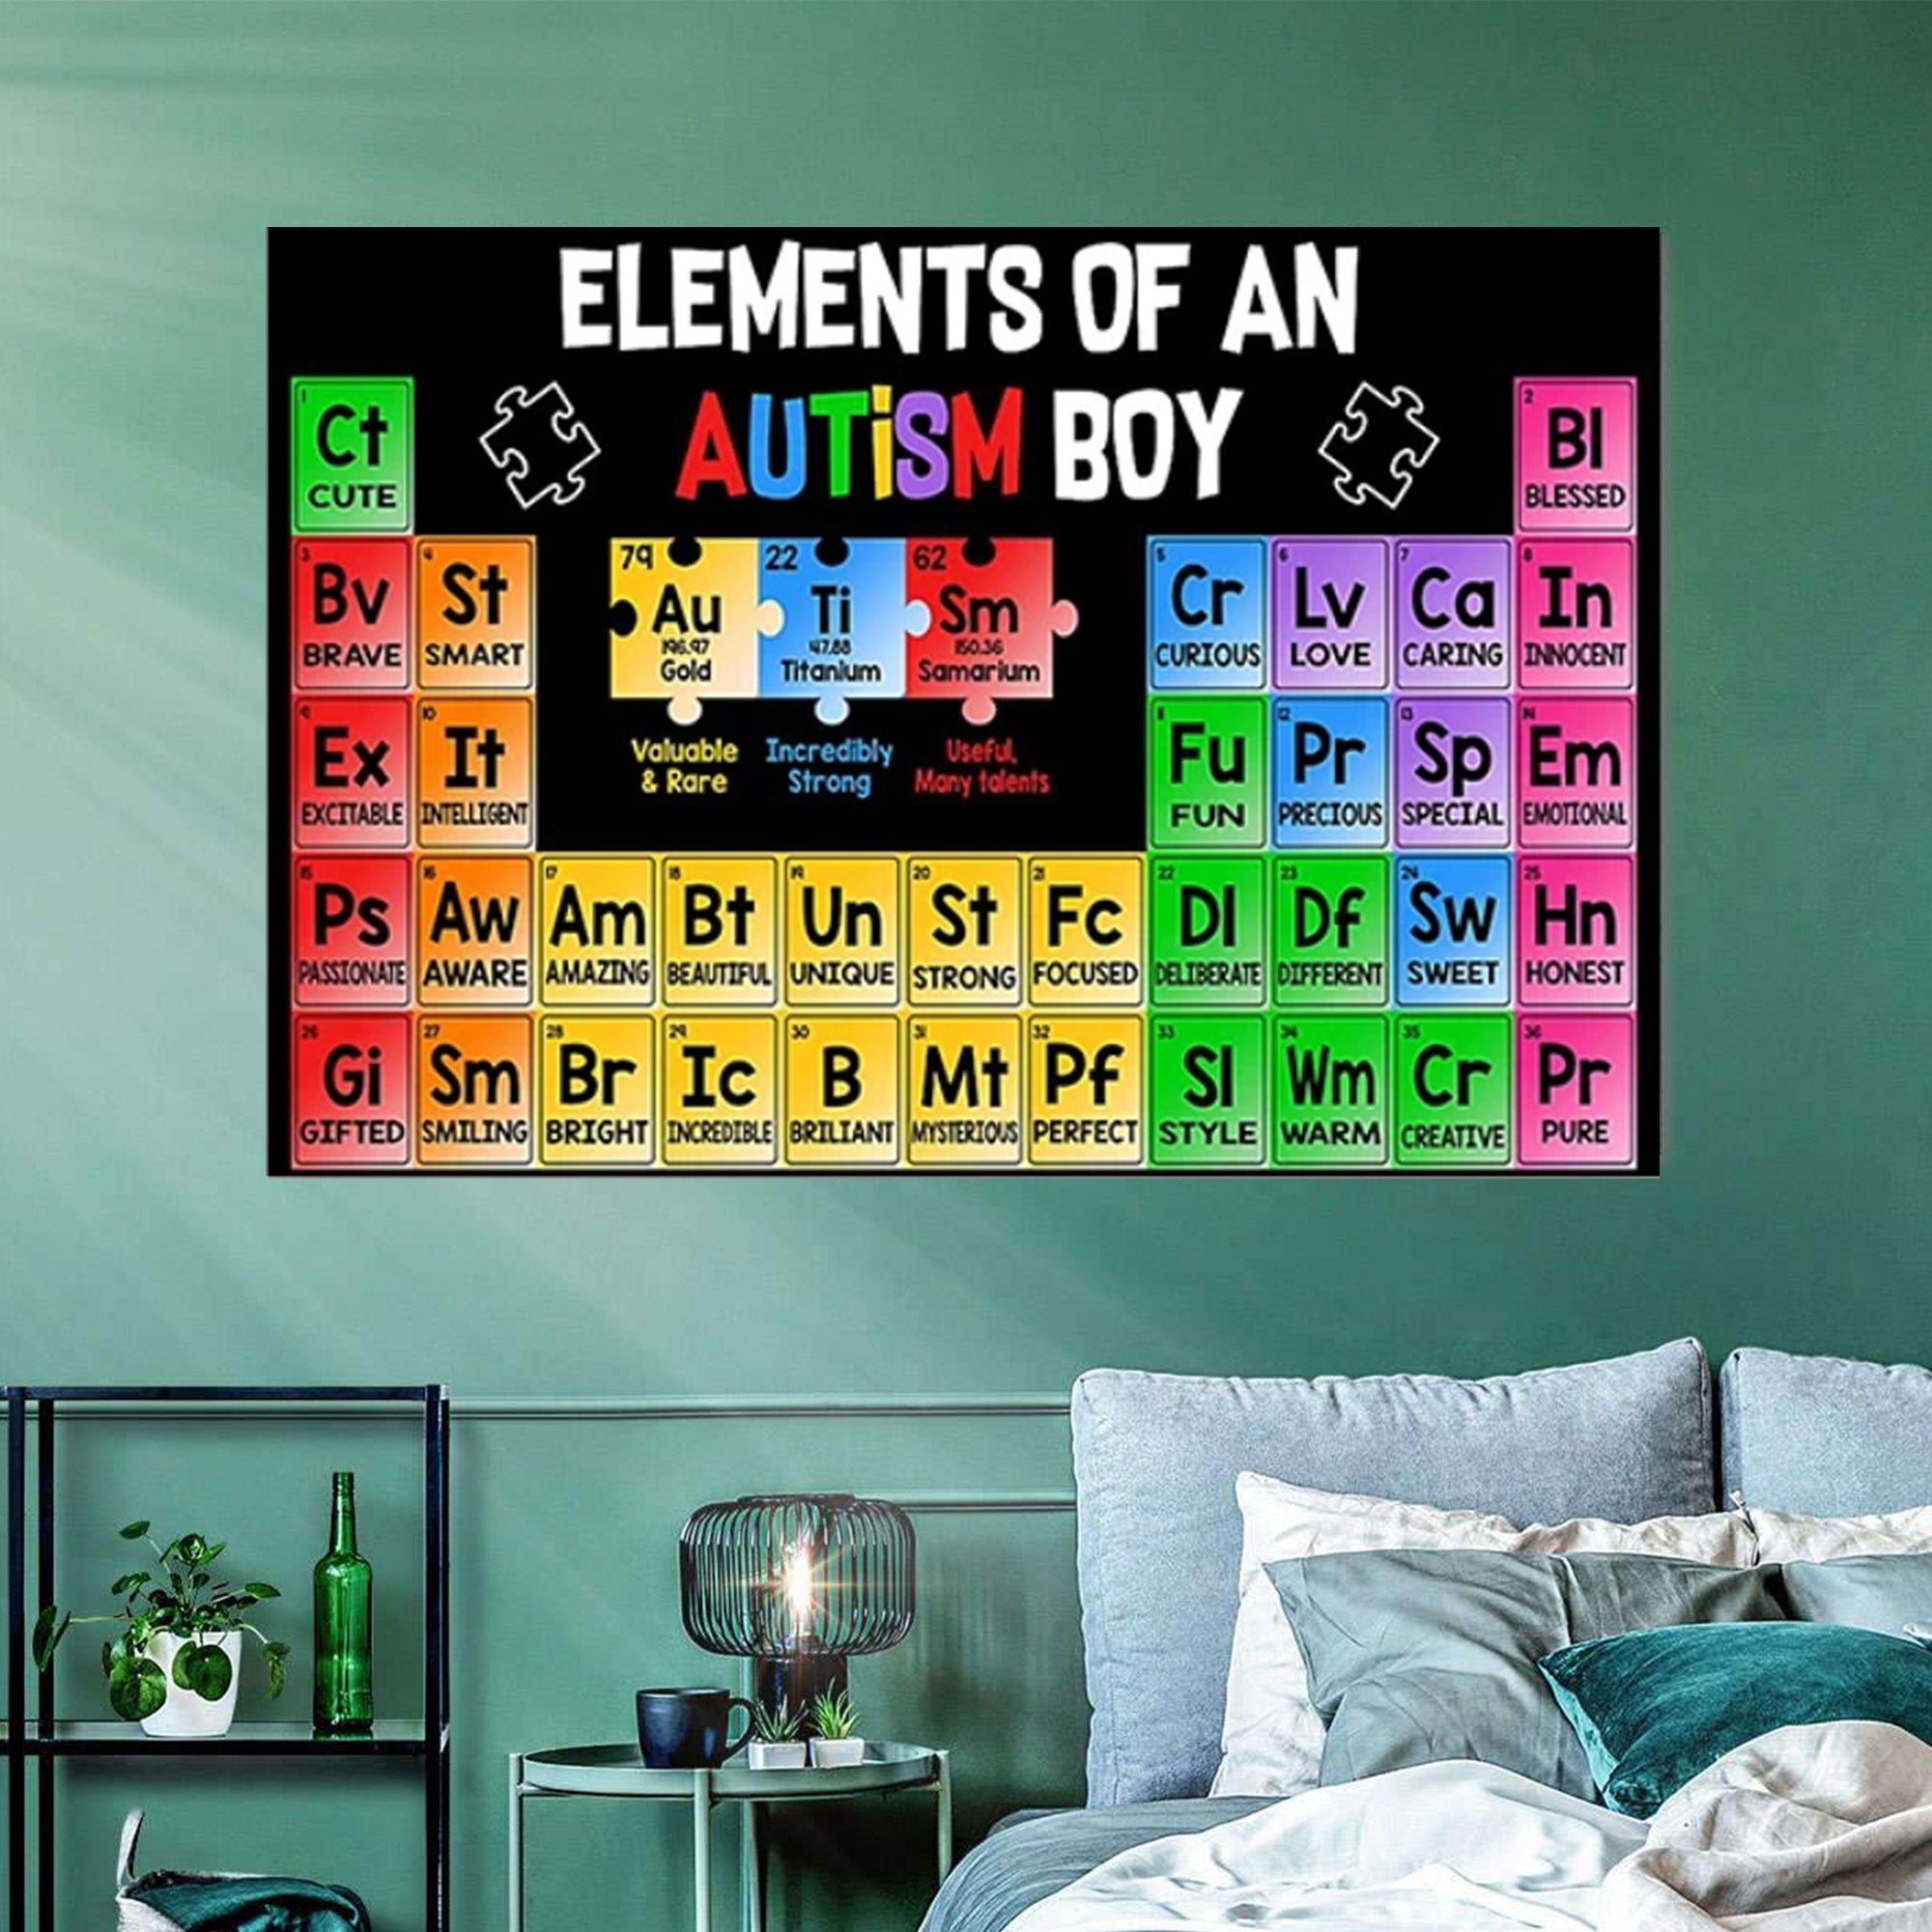 Autism Poster – Elements Of An Autism Boy